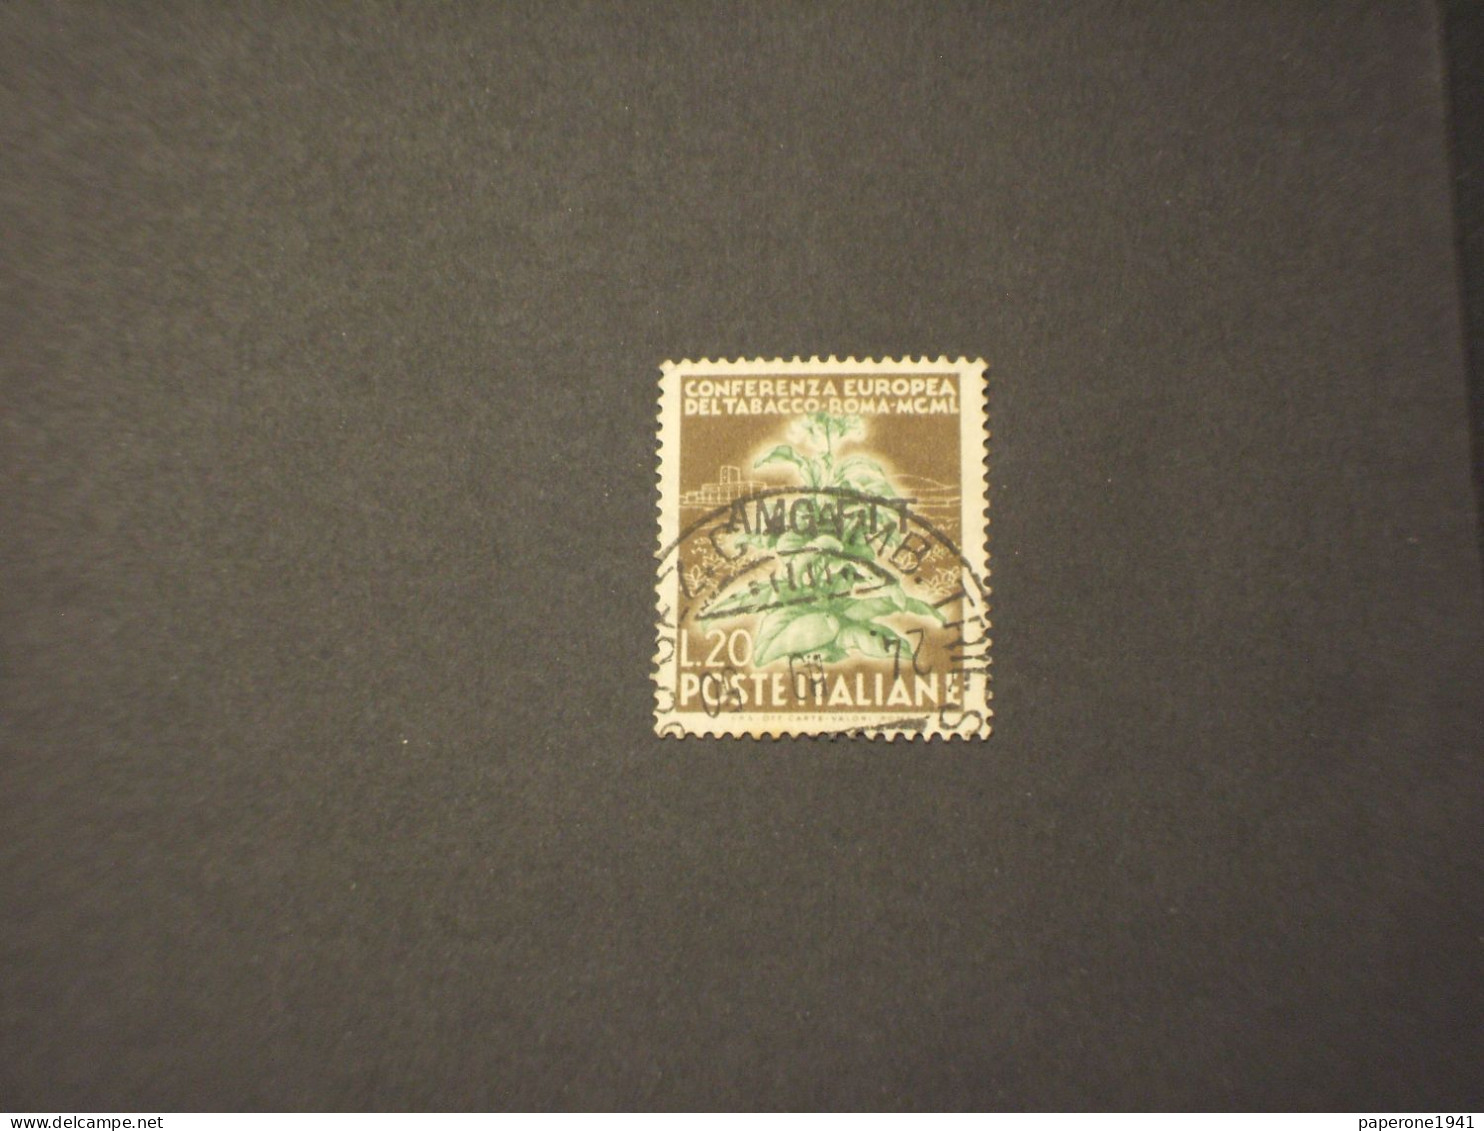 TRIESTE ZONA A-AMG-FTT - 1950 TABACCO L. 20 - TIMBRATO/USED - Used